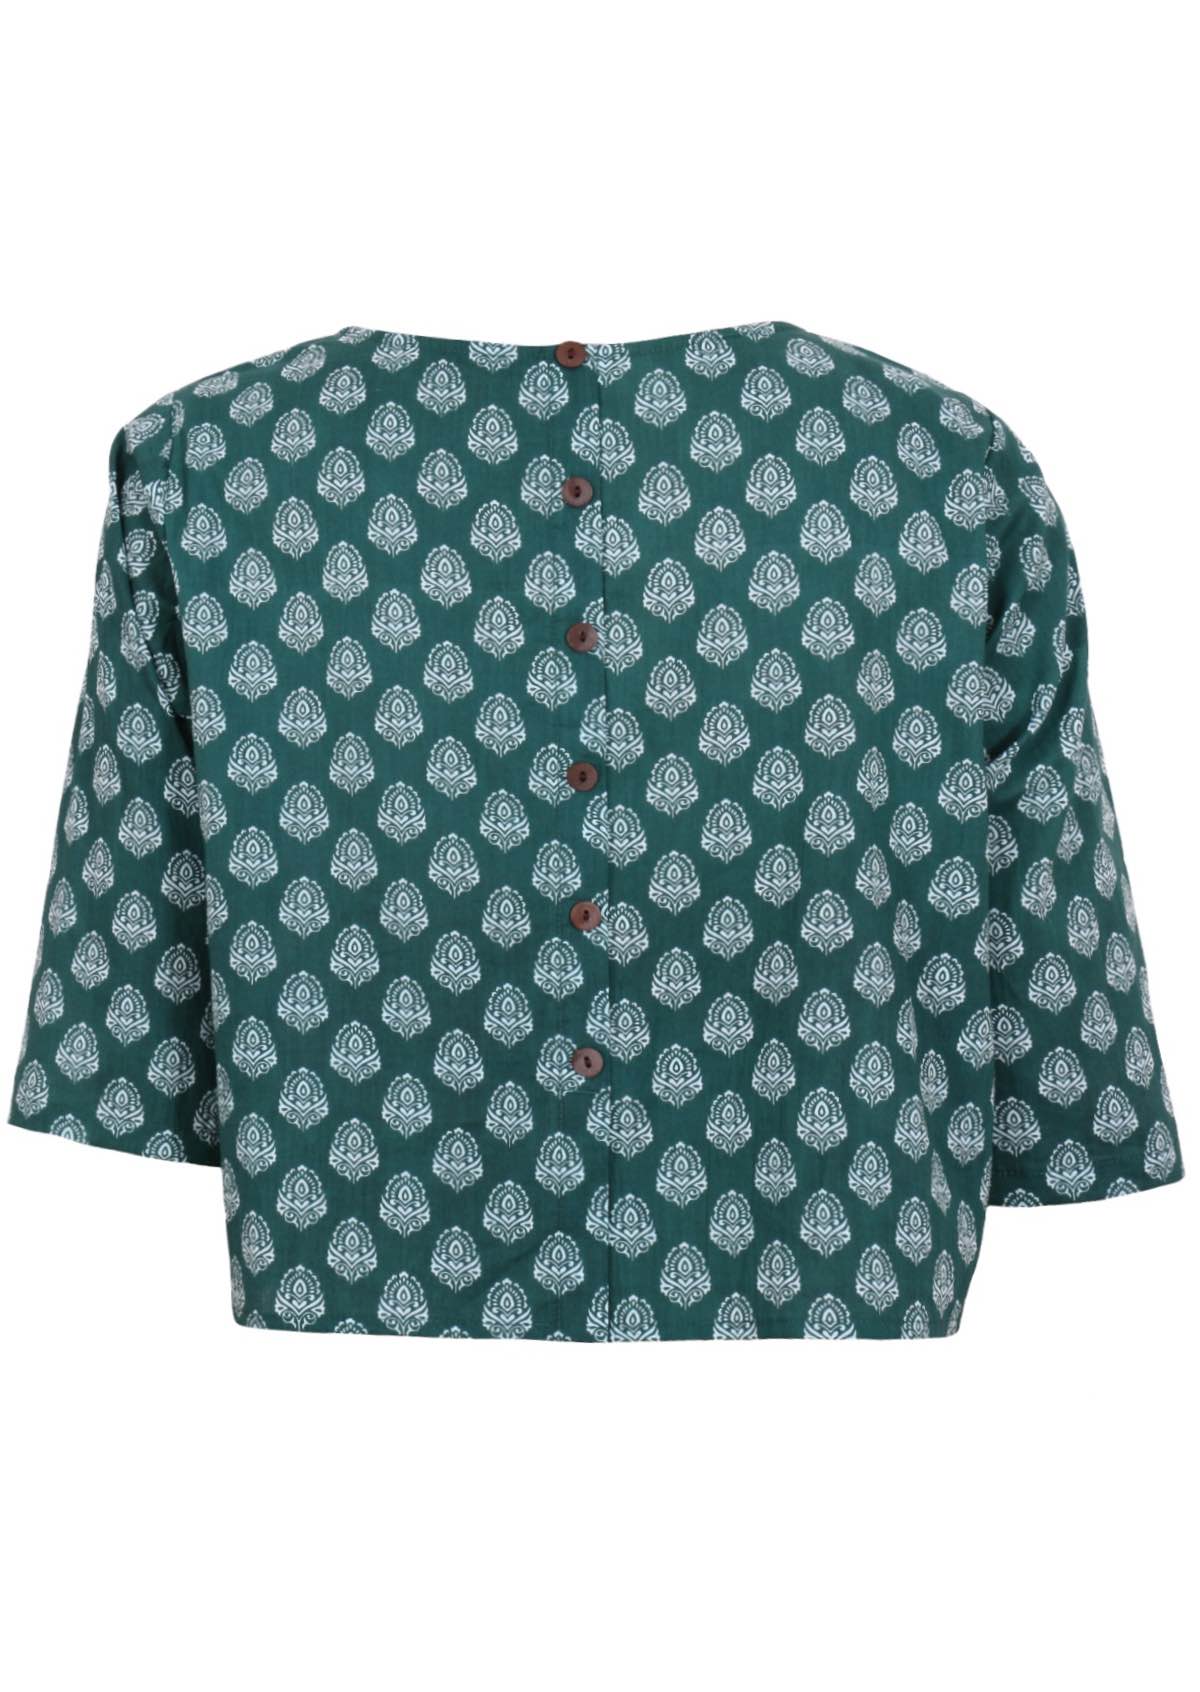 100% cotton top with 3/4 sleeves and decorative buttons at the back